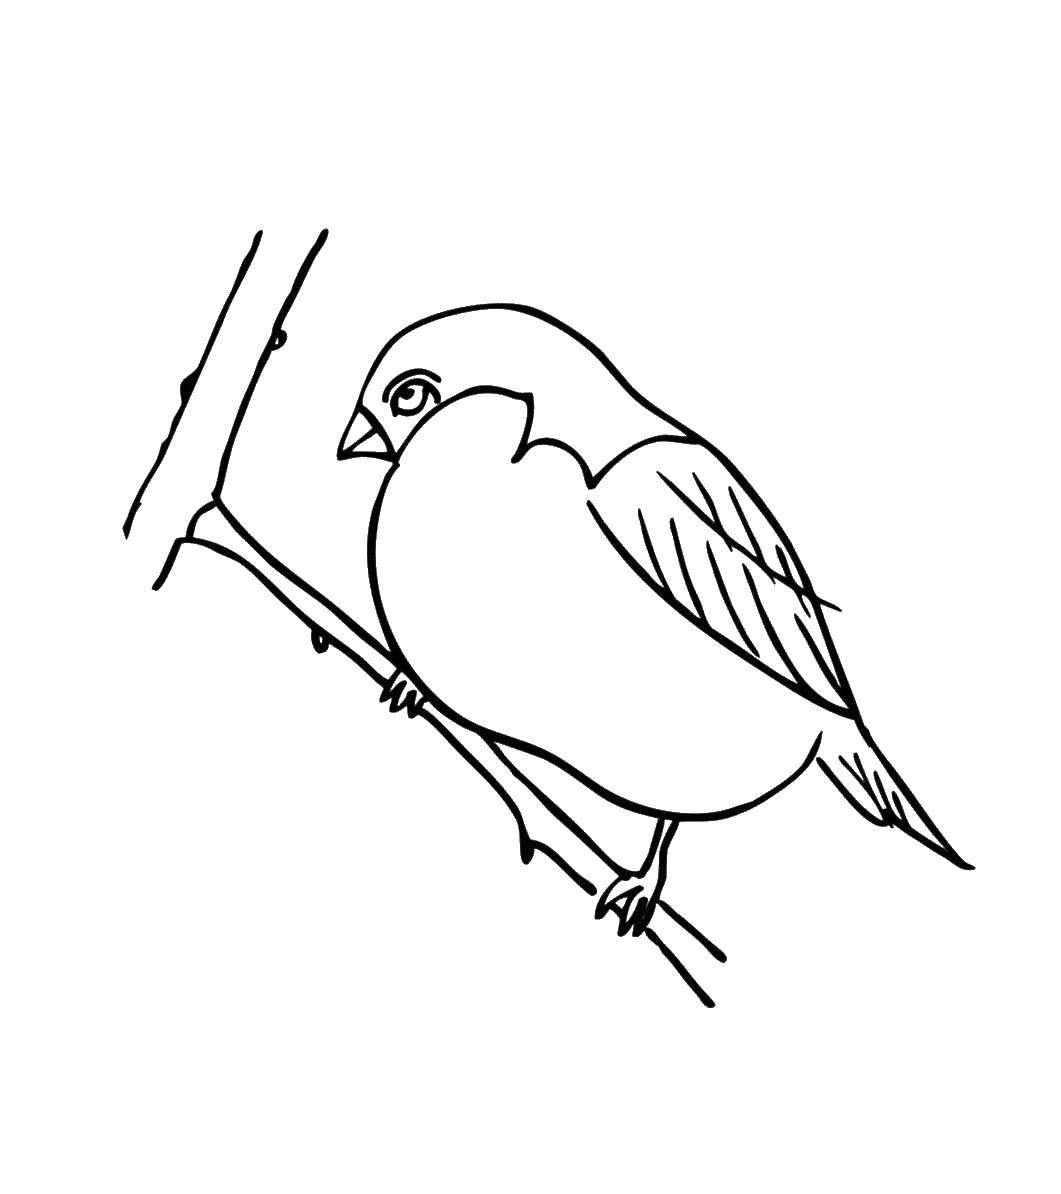 Coloring Bird on a branch. Category birds. Tags:  birds, branch.